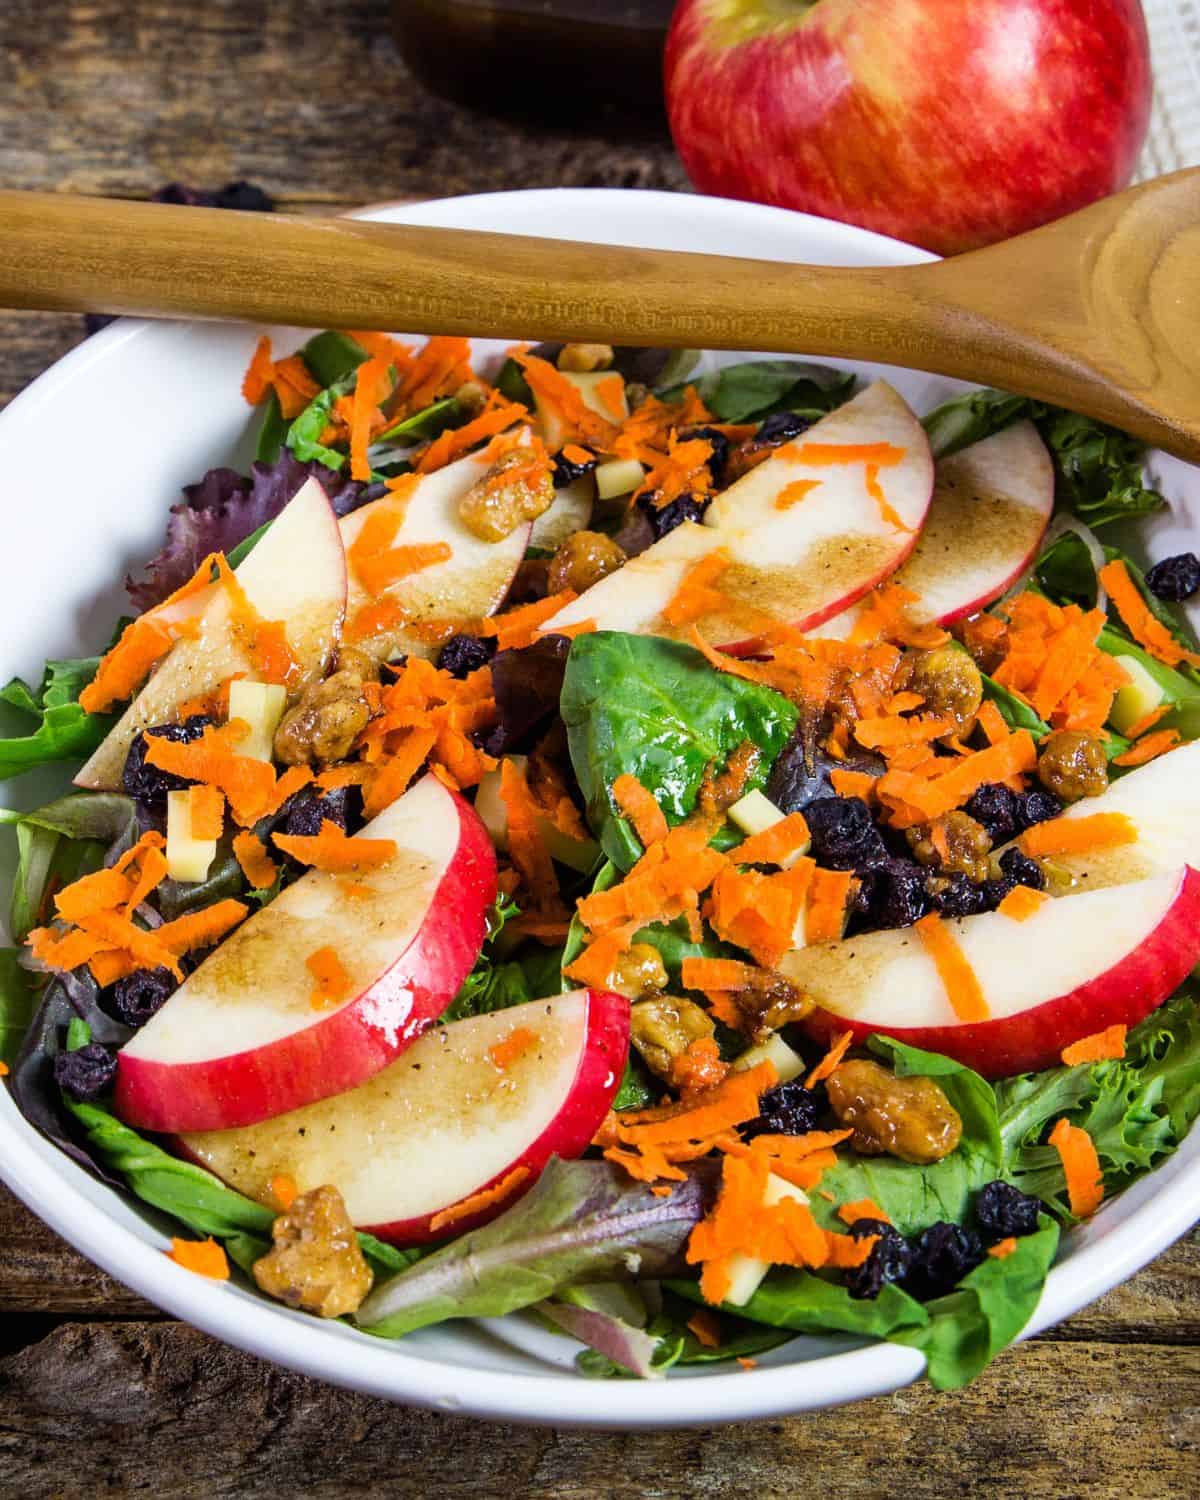 A white bowl filled with mesclun greens, apples, and shredded carrots with a vinaigrette on top.